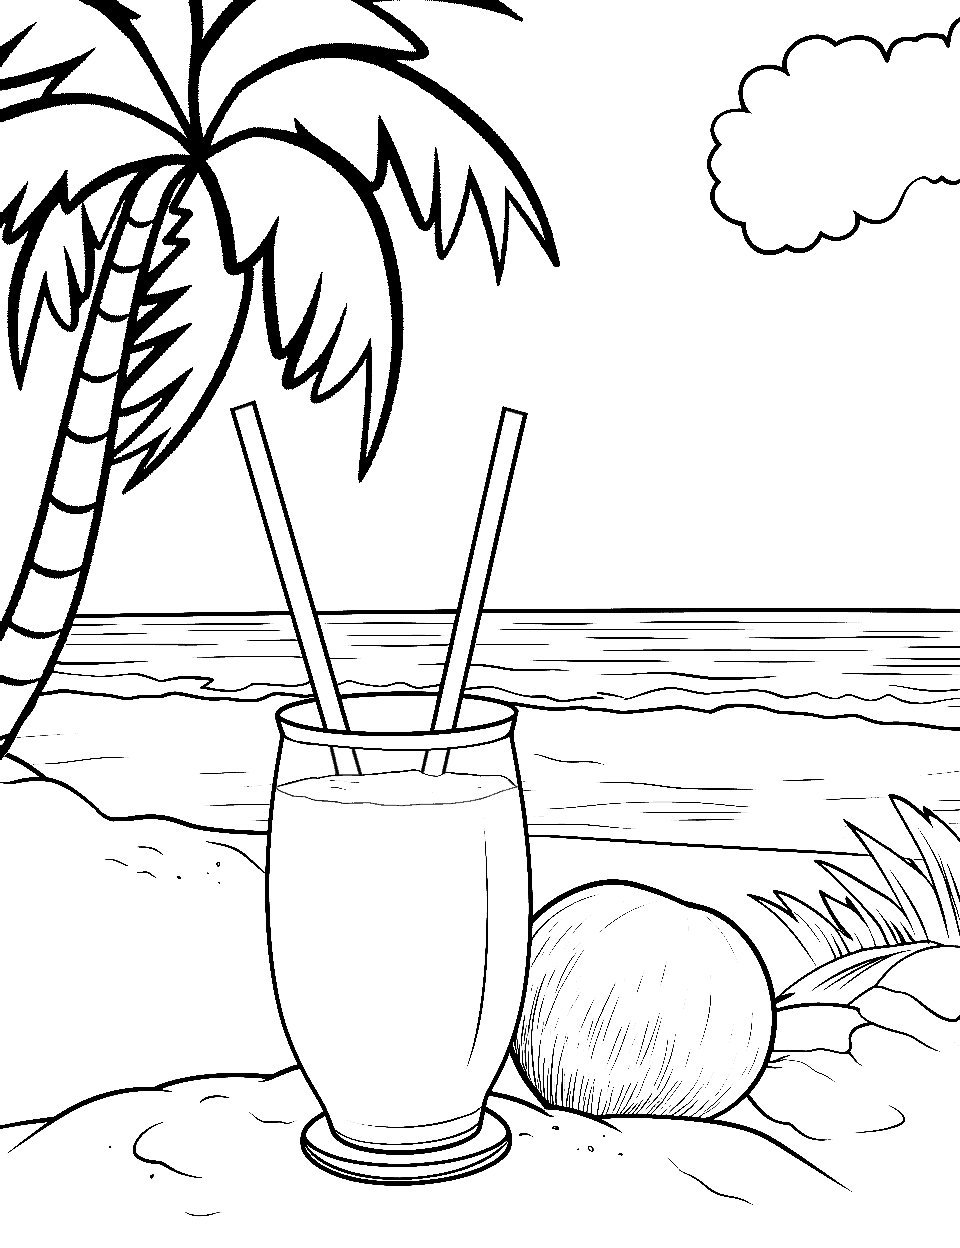 Tropical Coconut Drink Coloring Page - A coconut drink with a straw, set against a simple beach backdrop.